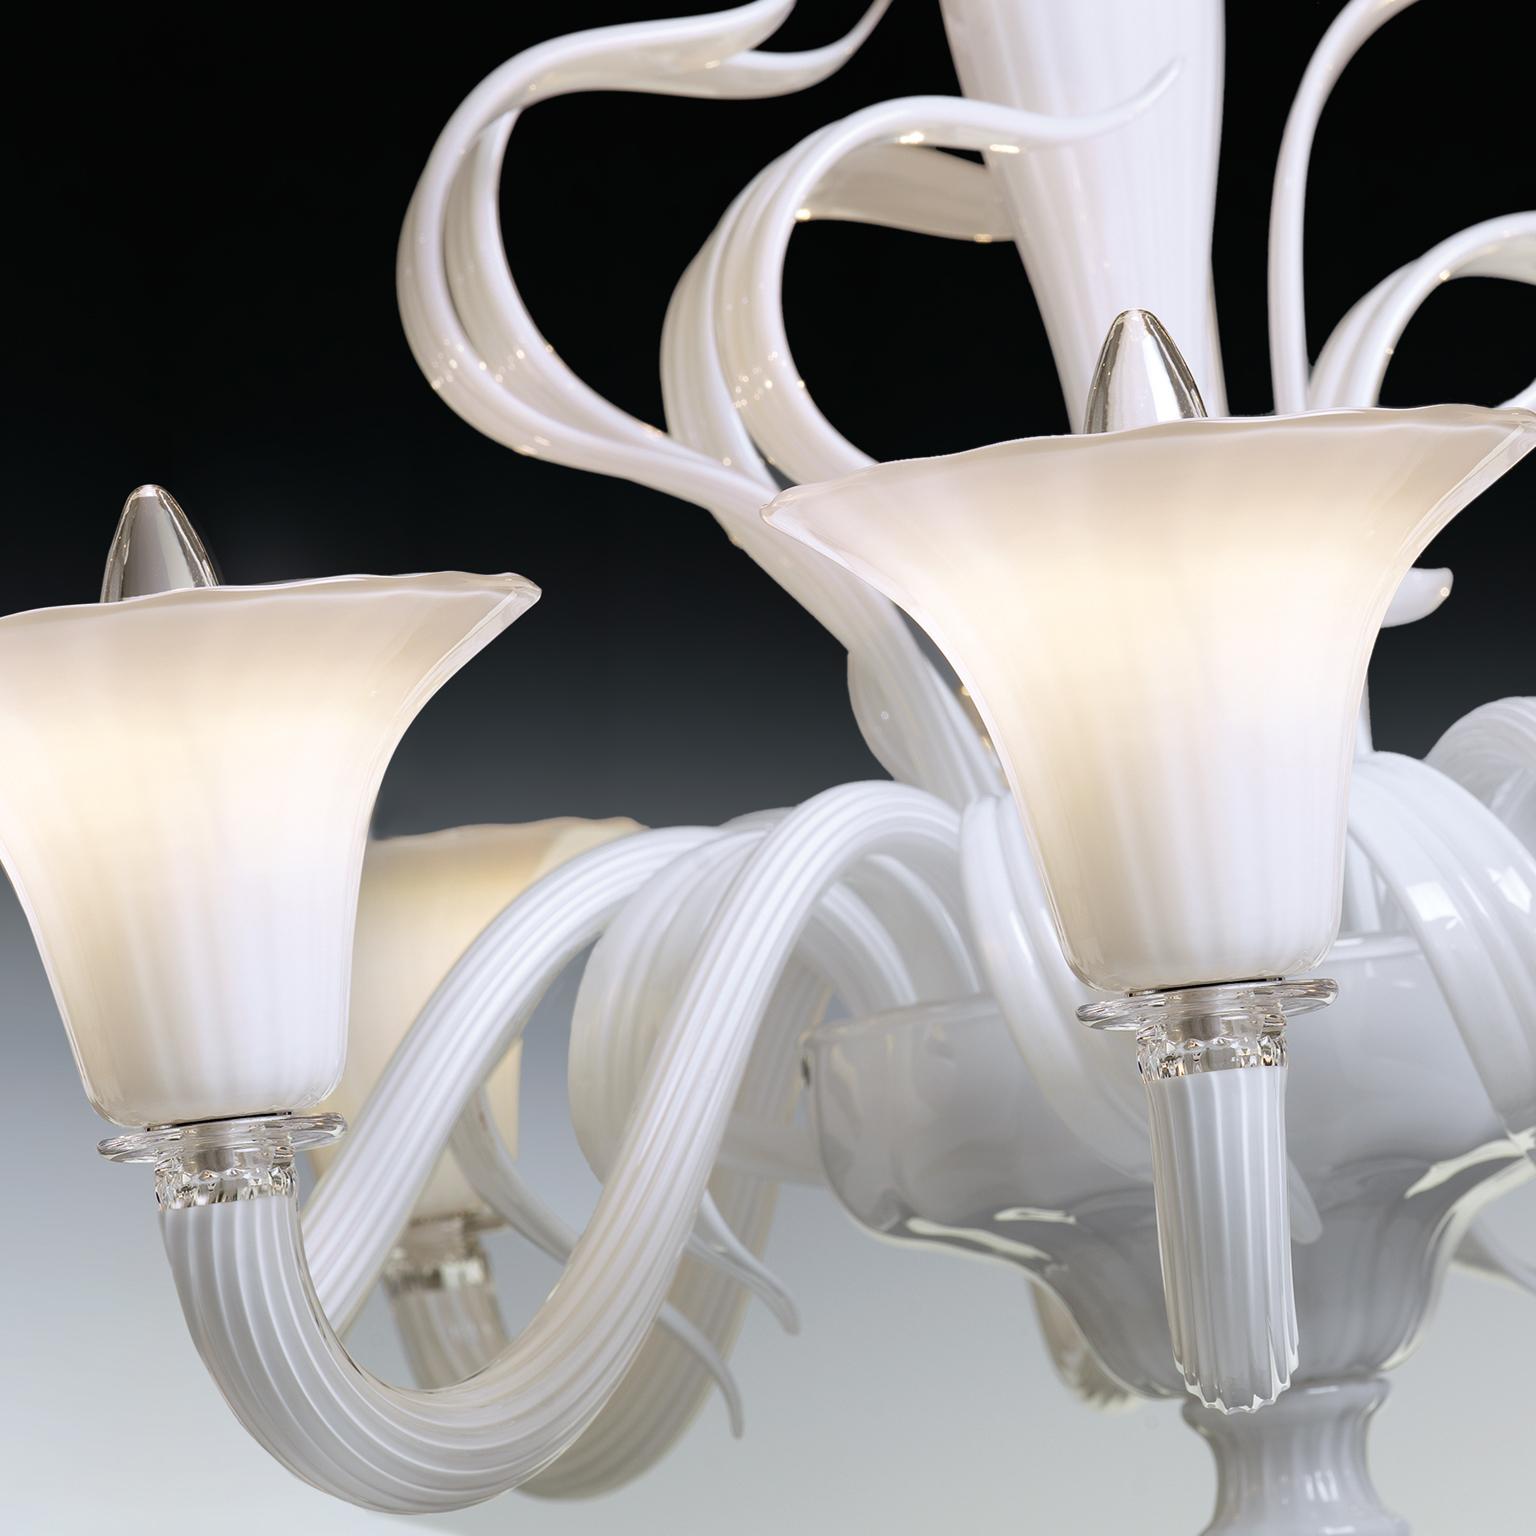 Vento Murano glass chandelier by Seguso Vetri d'Arte. Handmade, blown Murano glass chandelier with two dramatic tiers and 18 lights in an opaque white glass color and unique LED bulbs. Takes eighteen E 12 / 14 or LED light bulbs depending on the